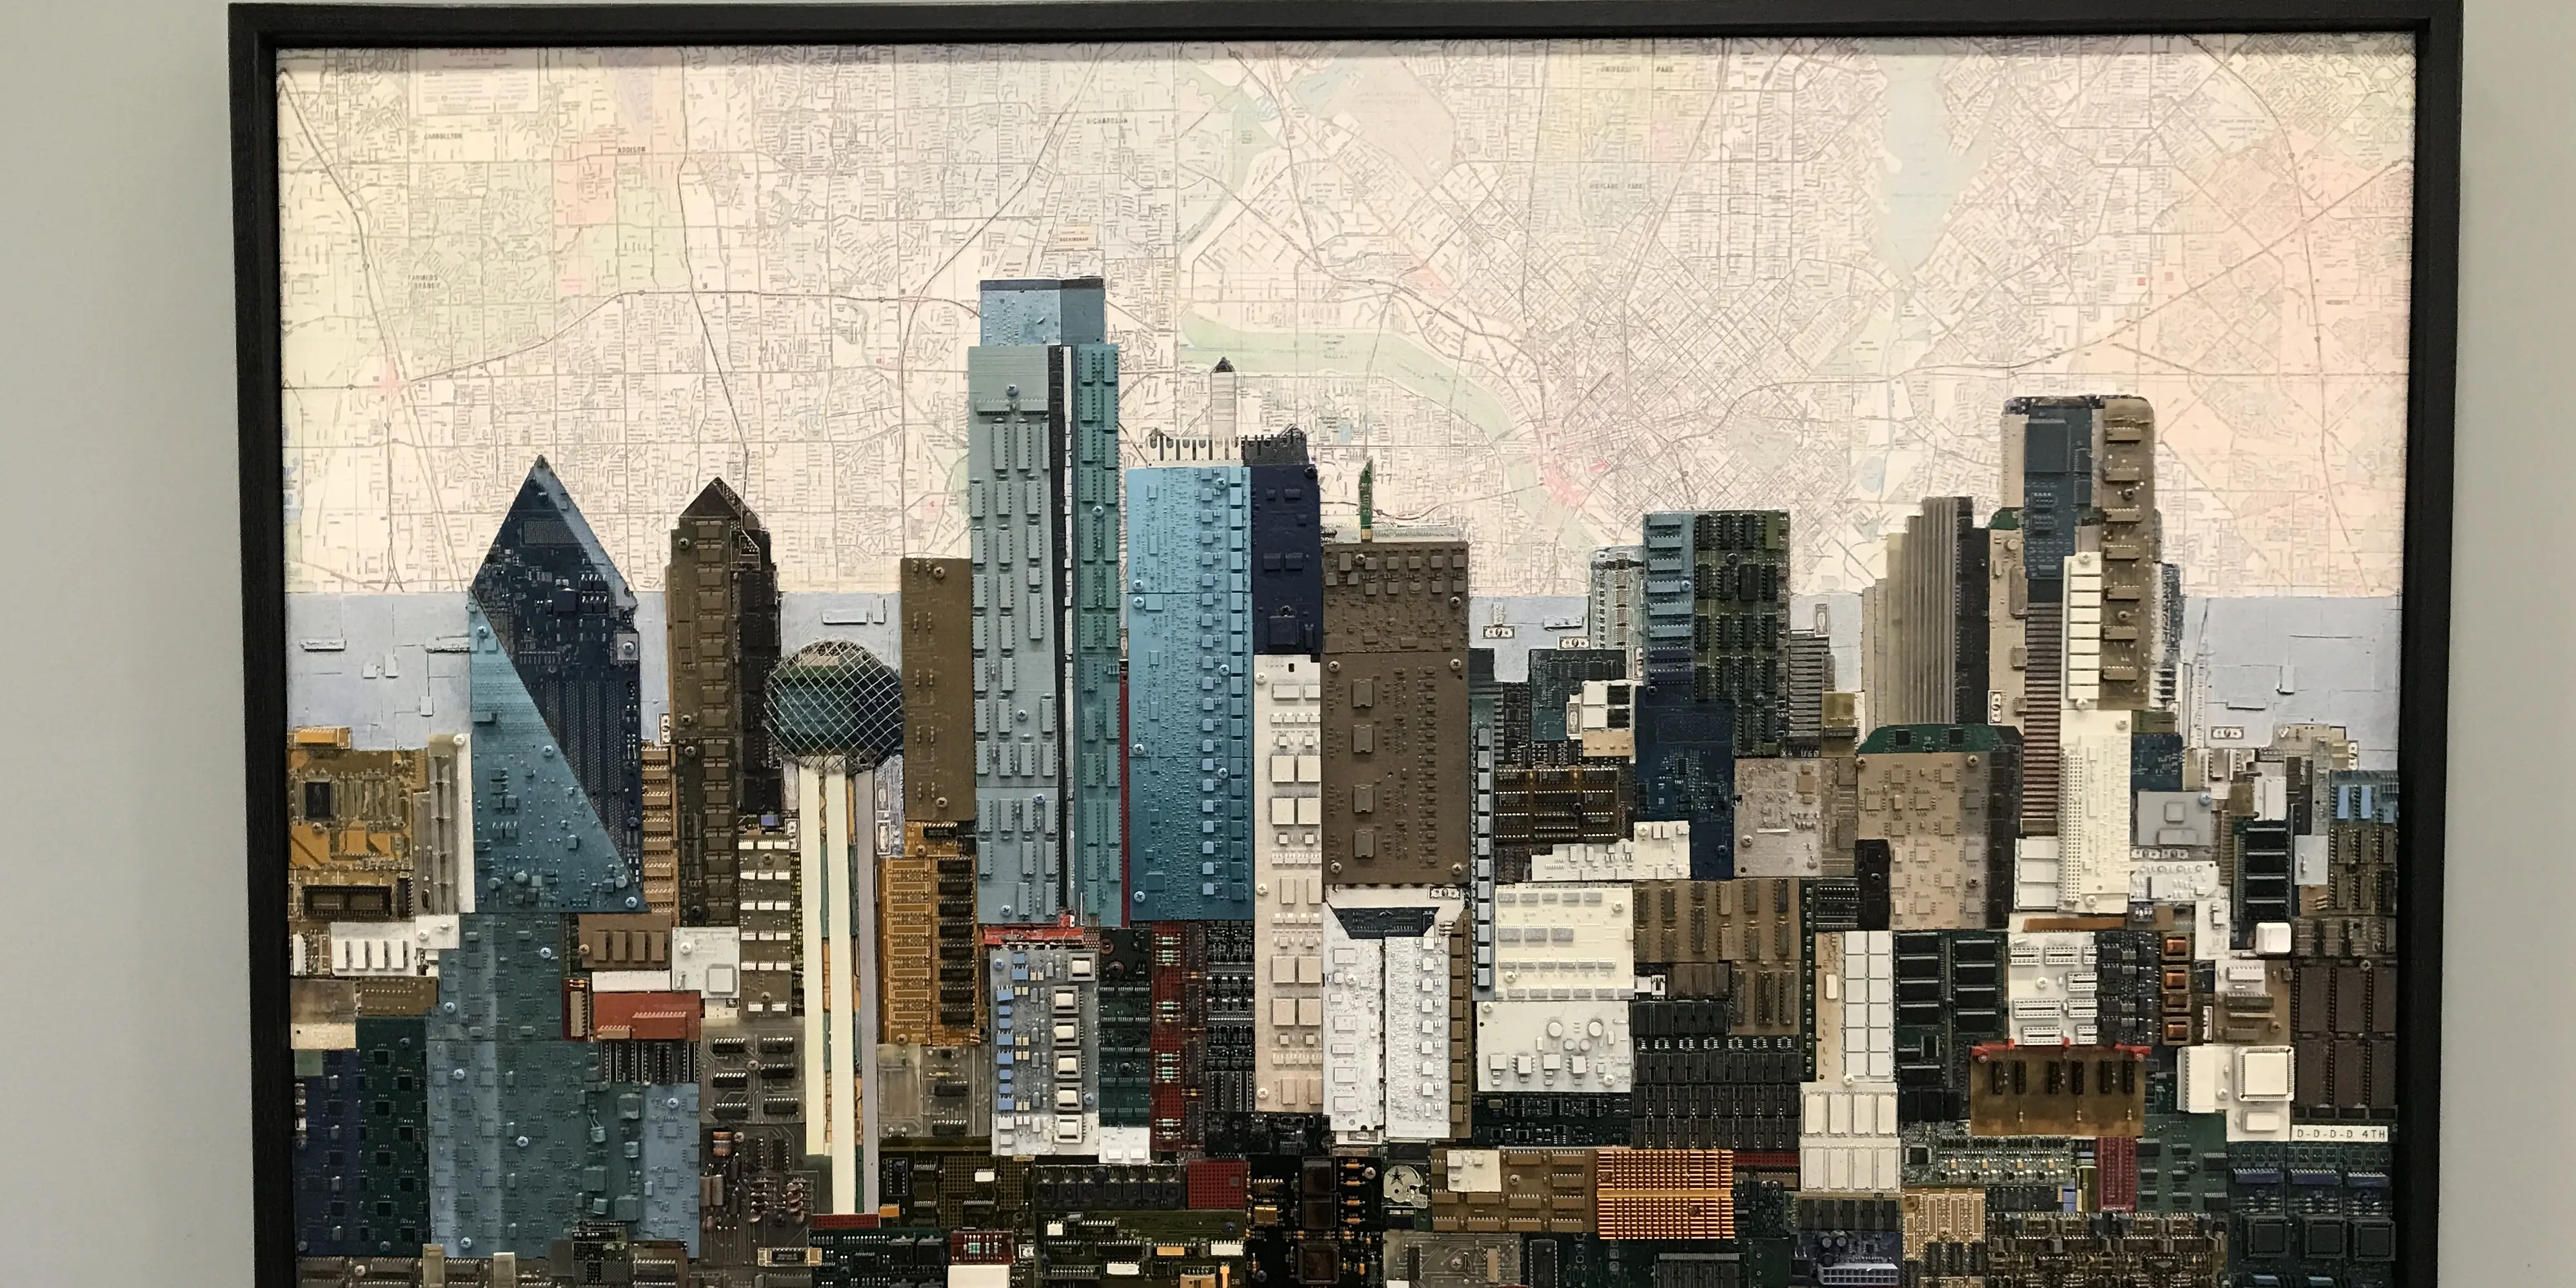 Dallas skyline made from computer parts